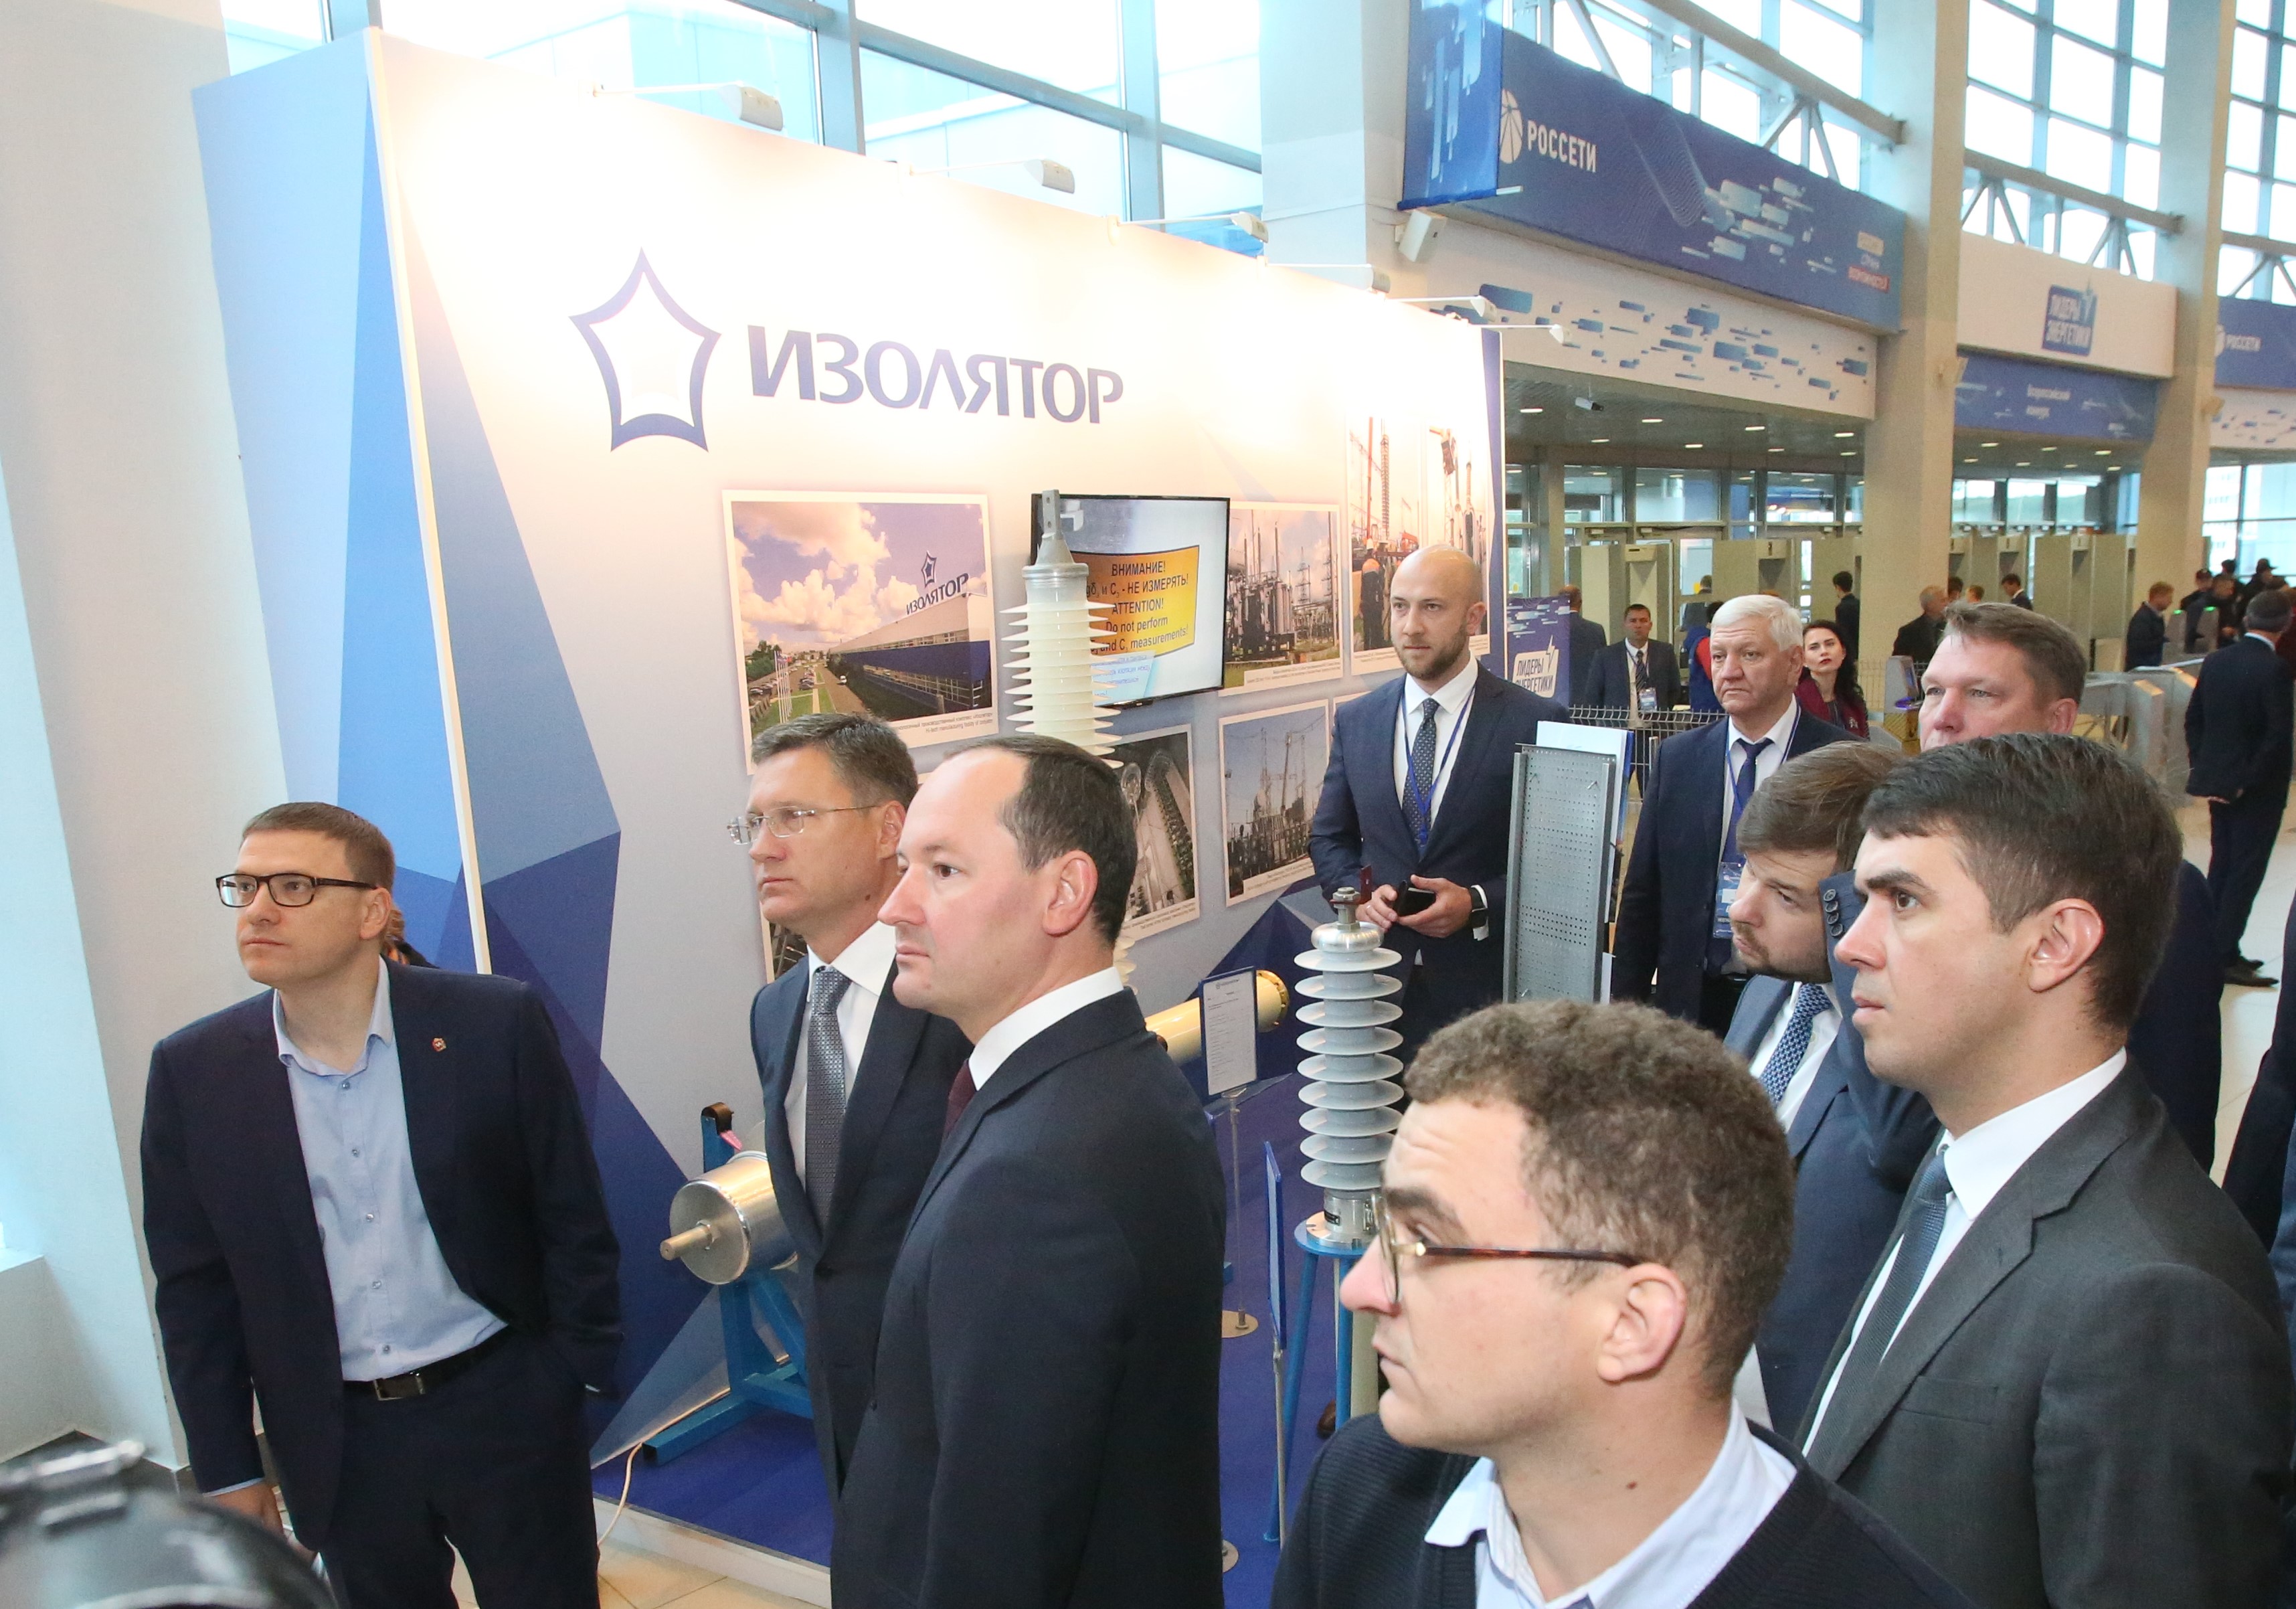 Walking the exposition of partner companies of Rosseti Group at the All-Russian congress “Leader of Power Industry” in Chelyabinsk, L-R: Acting Governor of Chelyabinsk region Alexey Teksler, Minster of Energy of Russian Federation Alexander Novak, General Director of Rosseti Group Pavel Livinsky